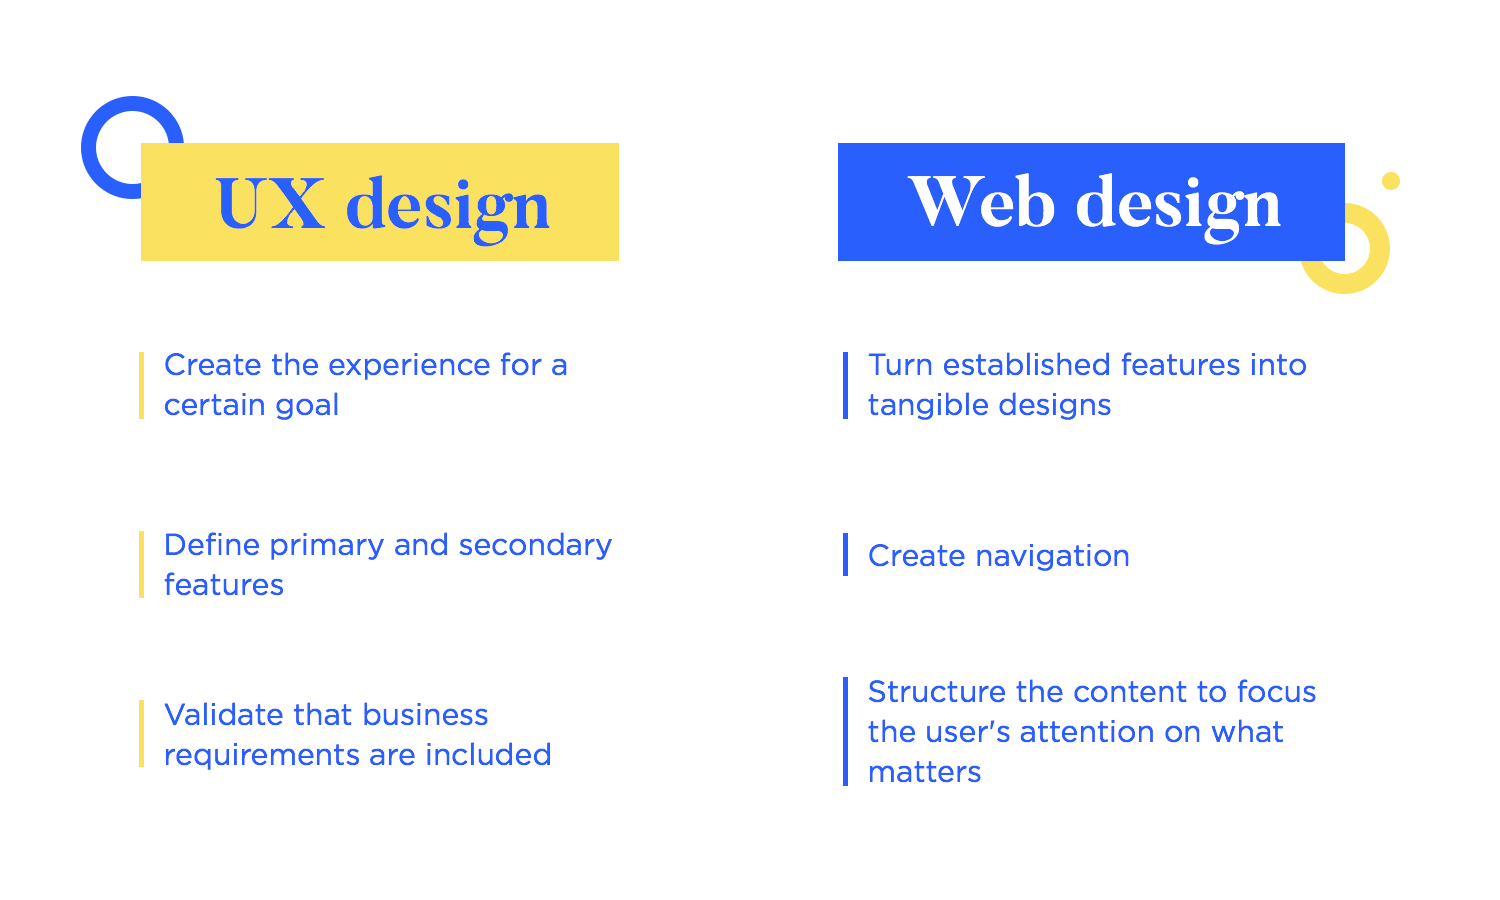 what is the difference between web design and ux design